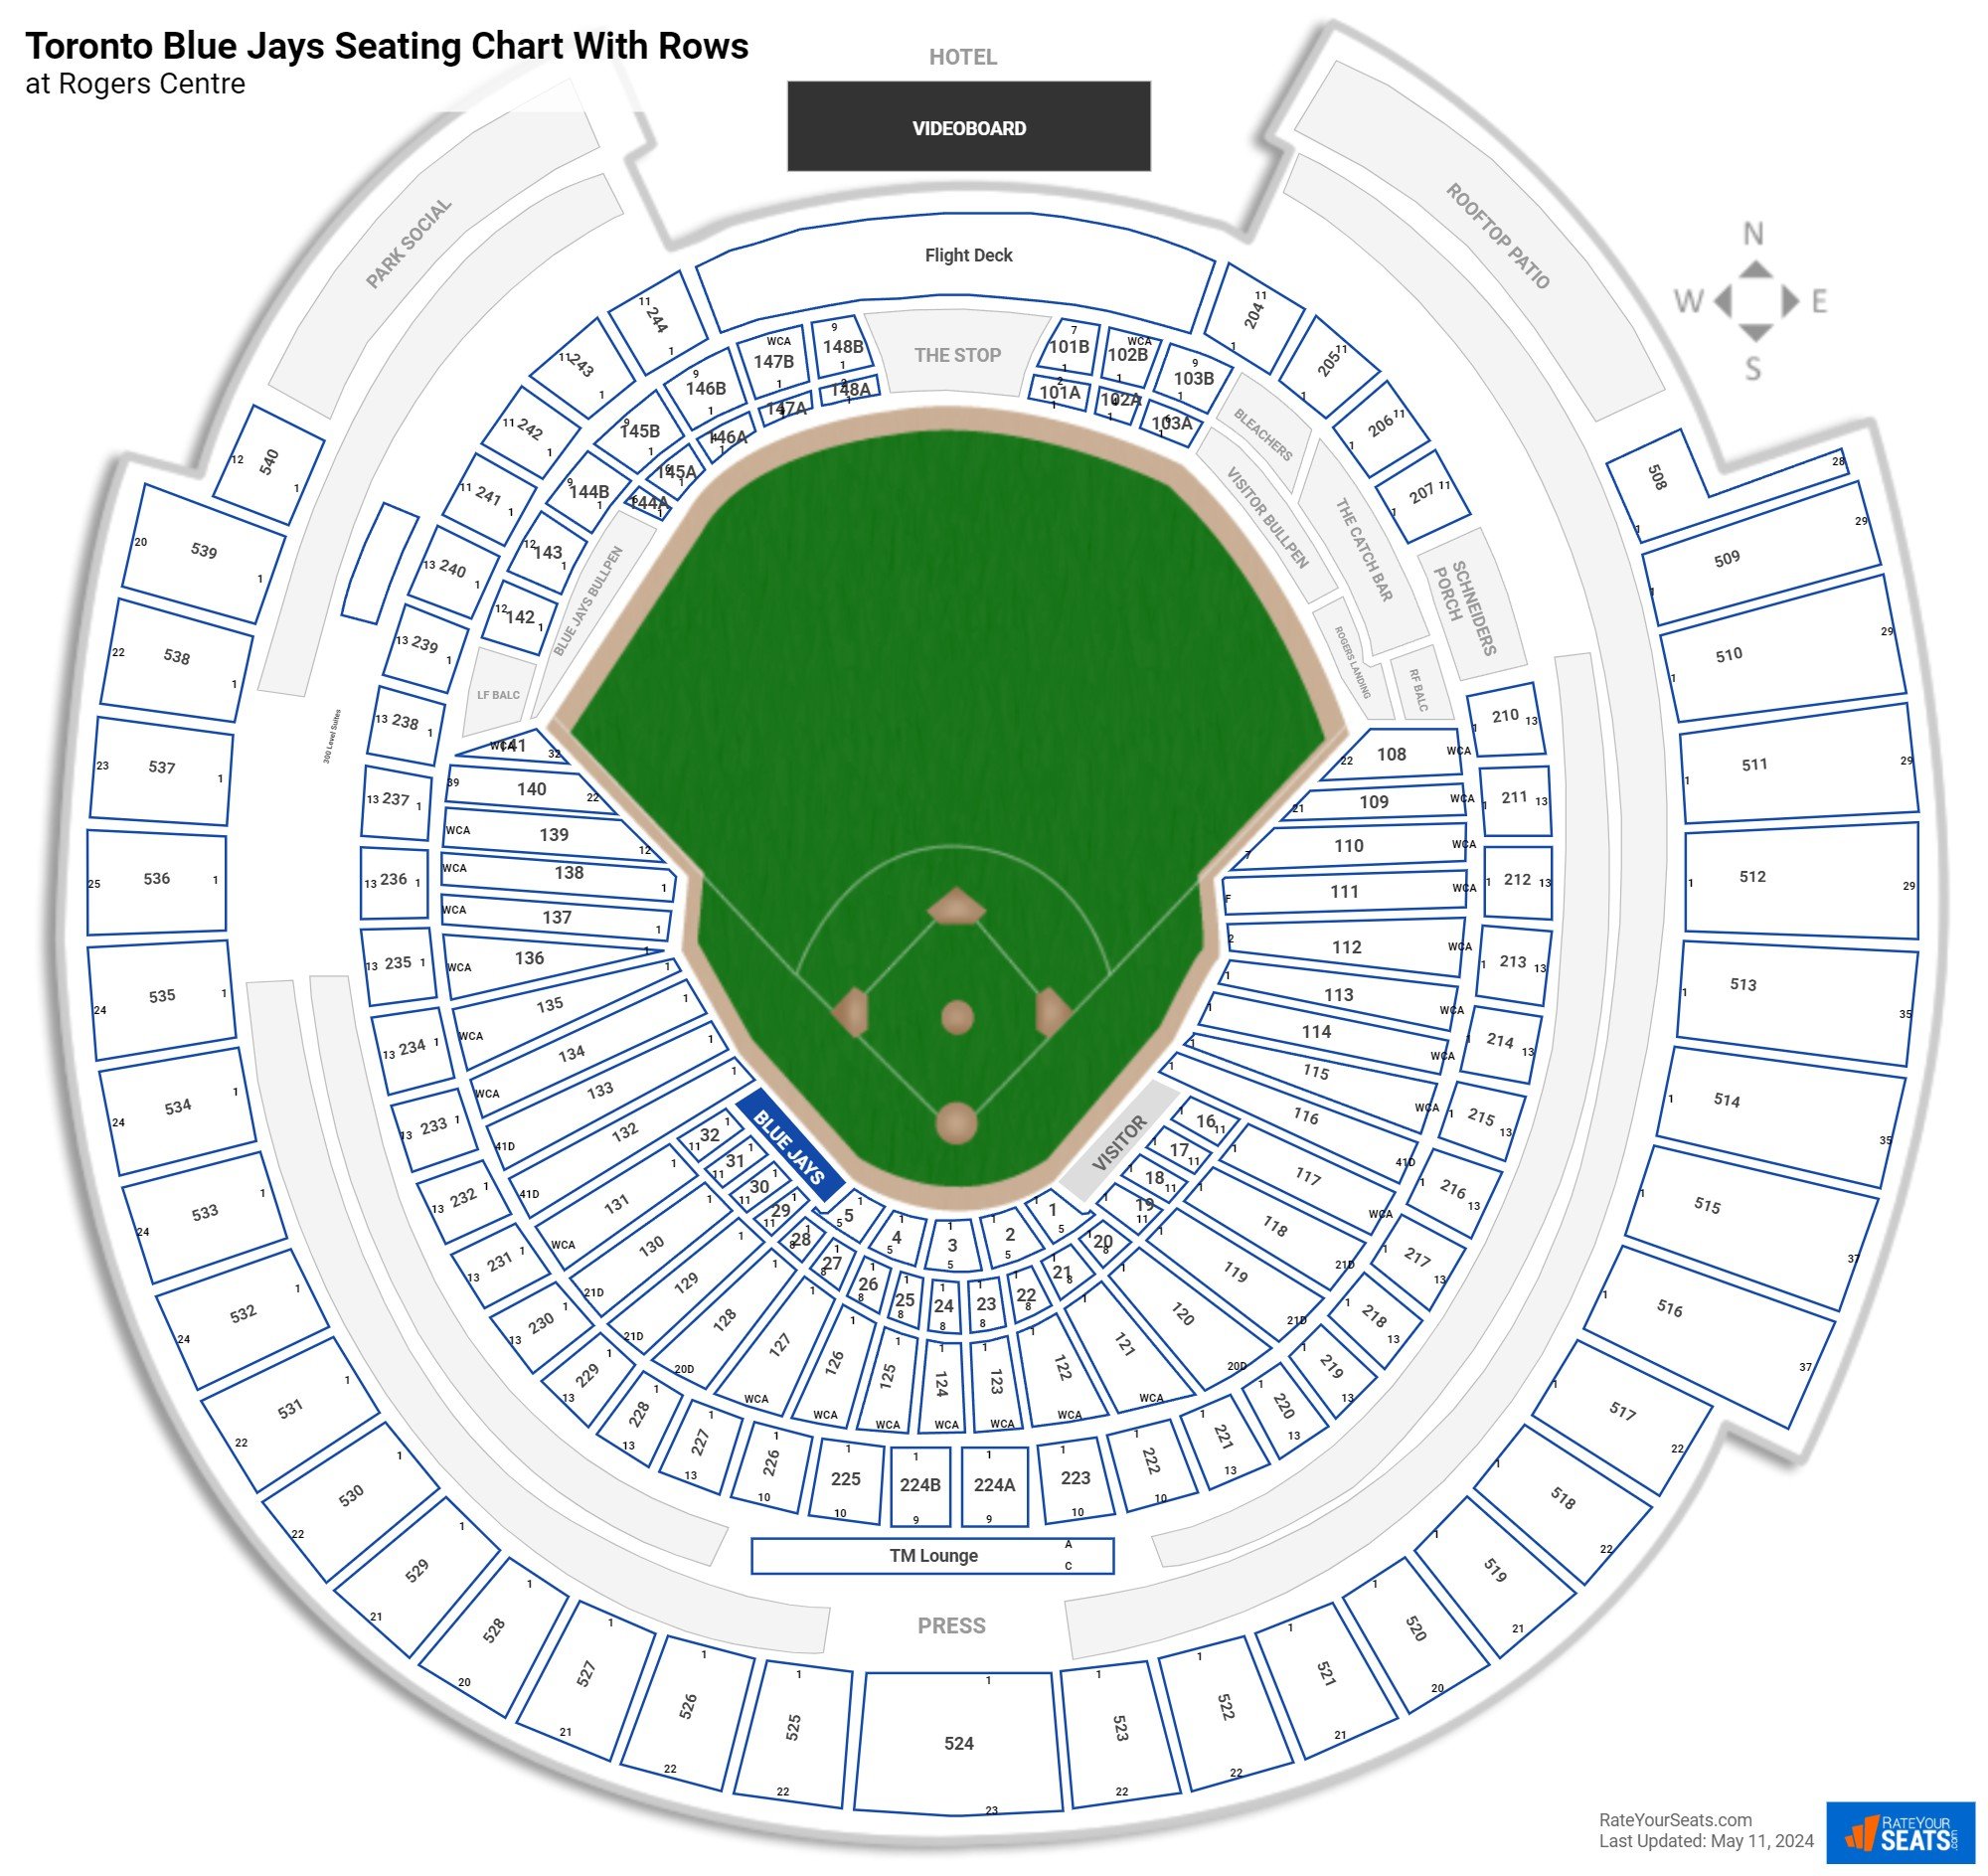 Rogers Centre Seating Charts Rateyourseats Com